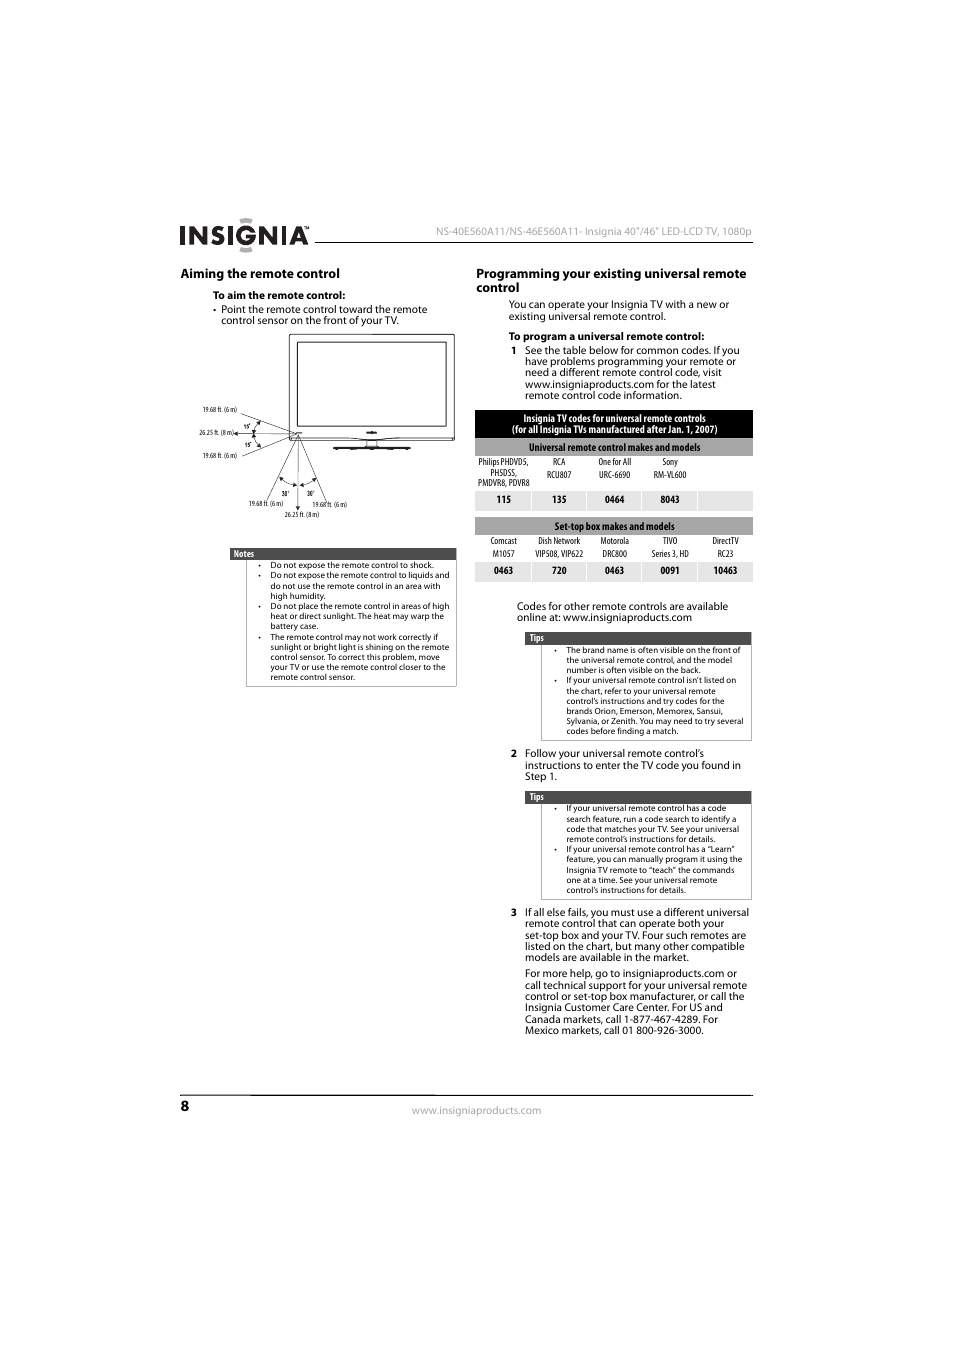 Aiming The Remote Control Programming Your Existing Universal Remote Control Insignia Ns 40e560a11 User Manual Page 12 40 Original Mode